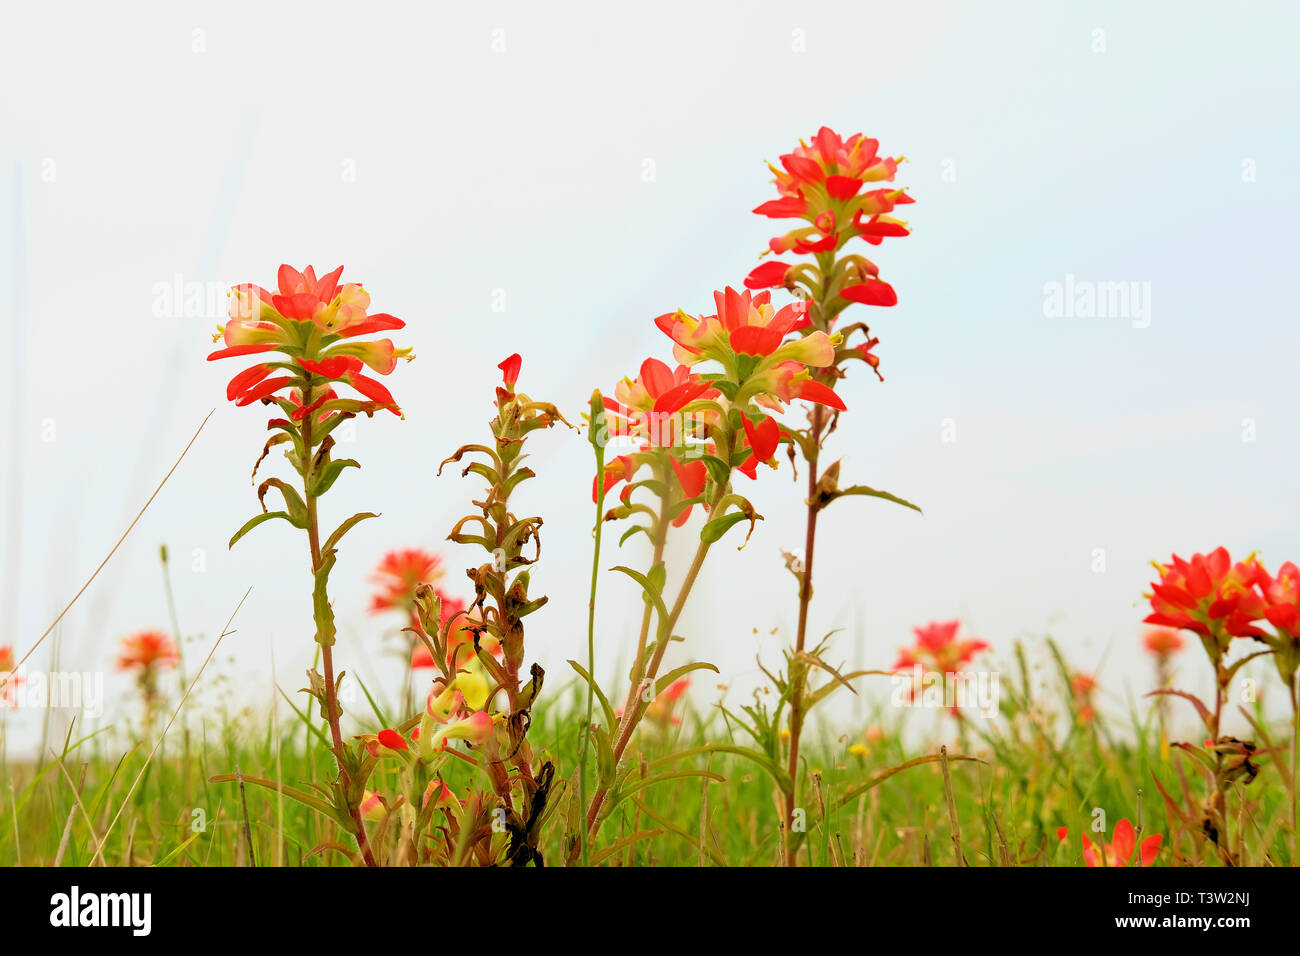 Texas Indian Paintbrush, castilleja indivisa; member of the Scrophulariaceae, snapdragon family; Spring time wildflowers in the Texas countryside. Stock Photo